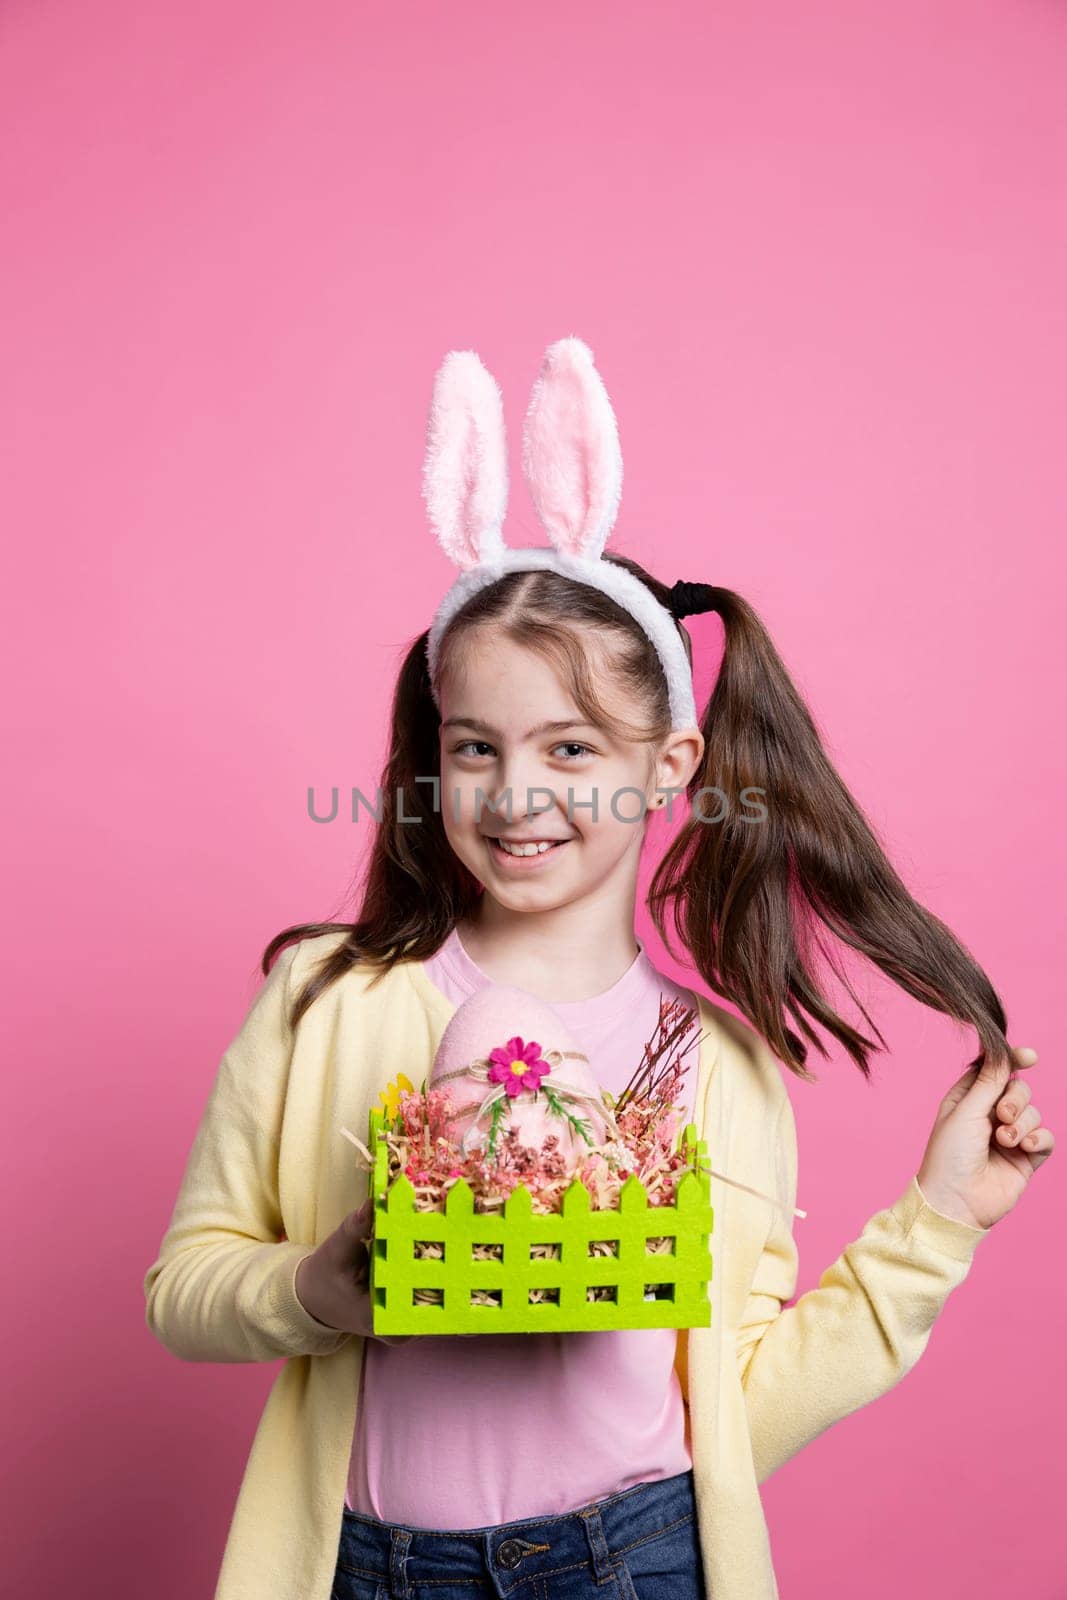 Young cheerful child with bunny ears holding colored basket in studio, posing with painted eggs and ribbons. Small girl excited about easter celebrations, shows handmade ornaments.